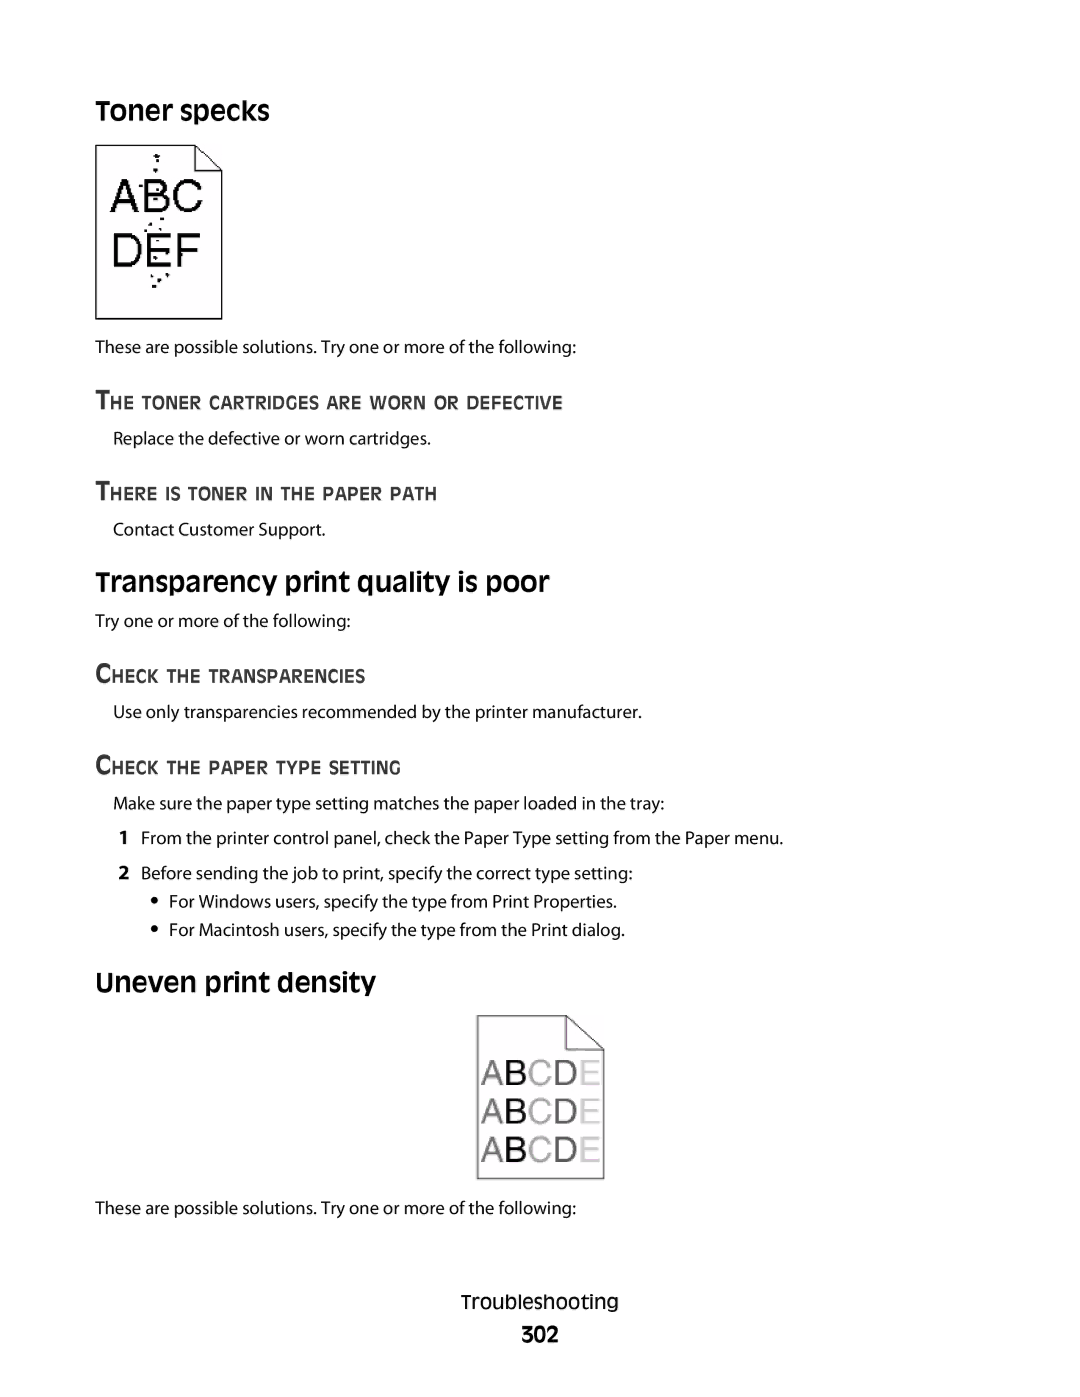 Lexmark MS00850, MS00859, MS00853, MS00855 manual Toner specks, Transparency print quality is poor, Uneven print density, 302 